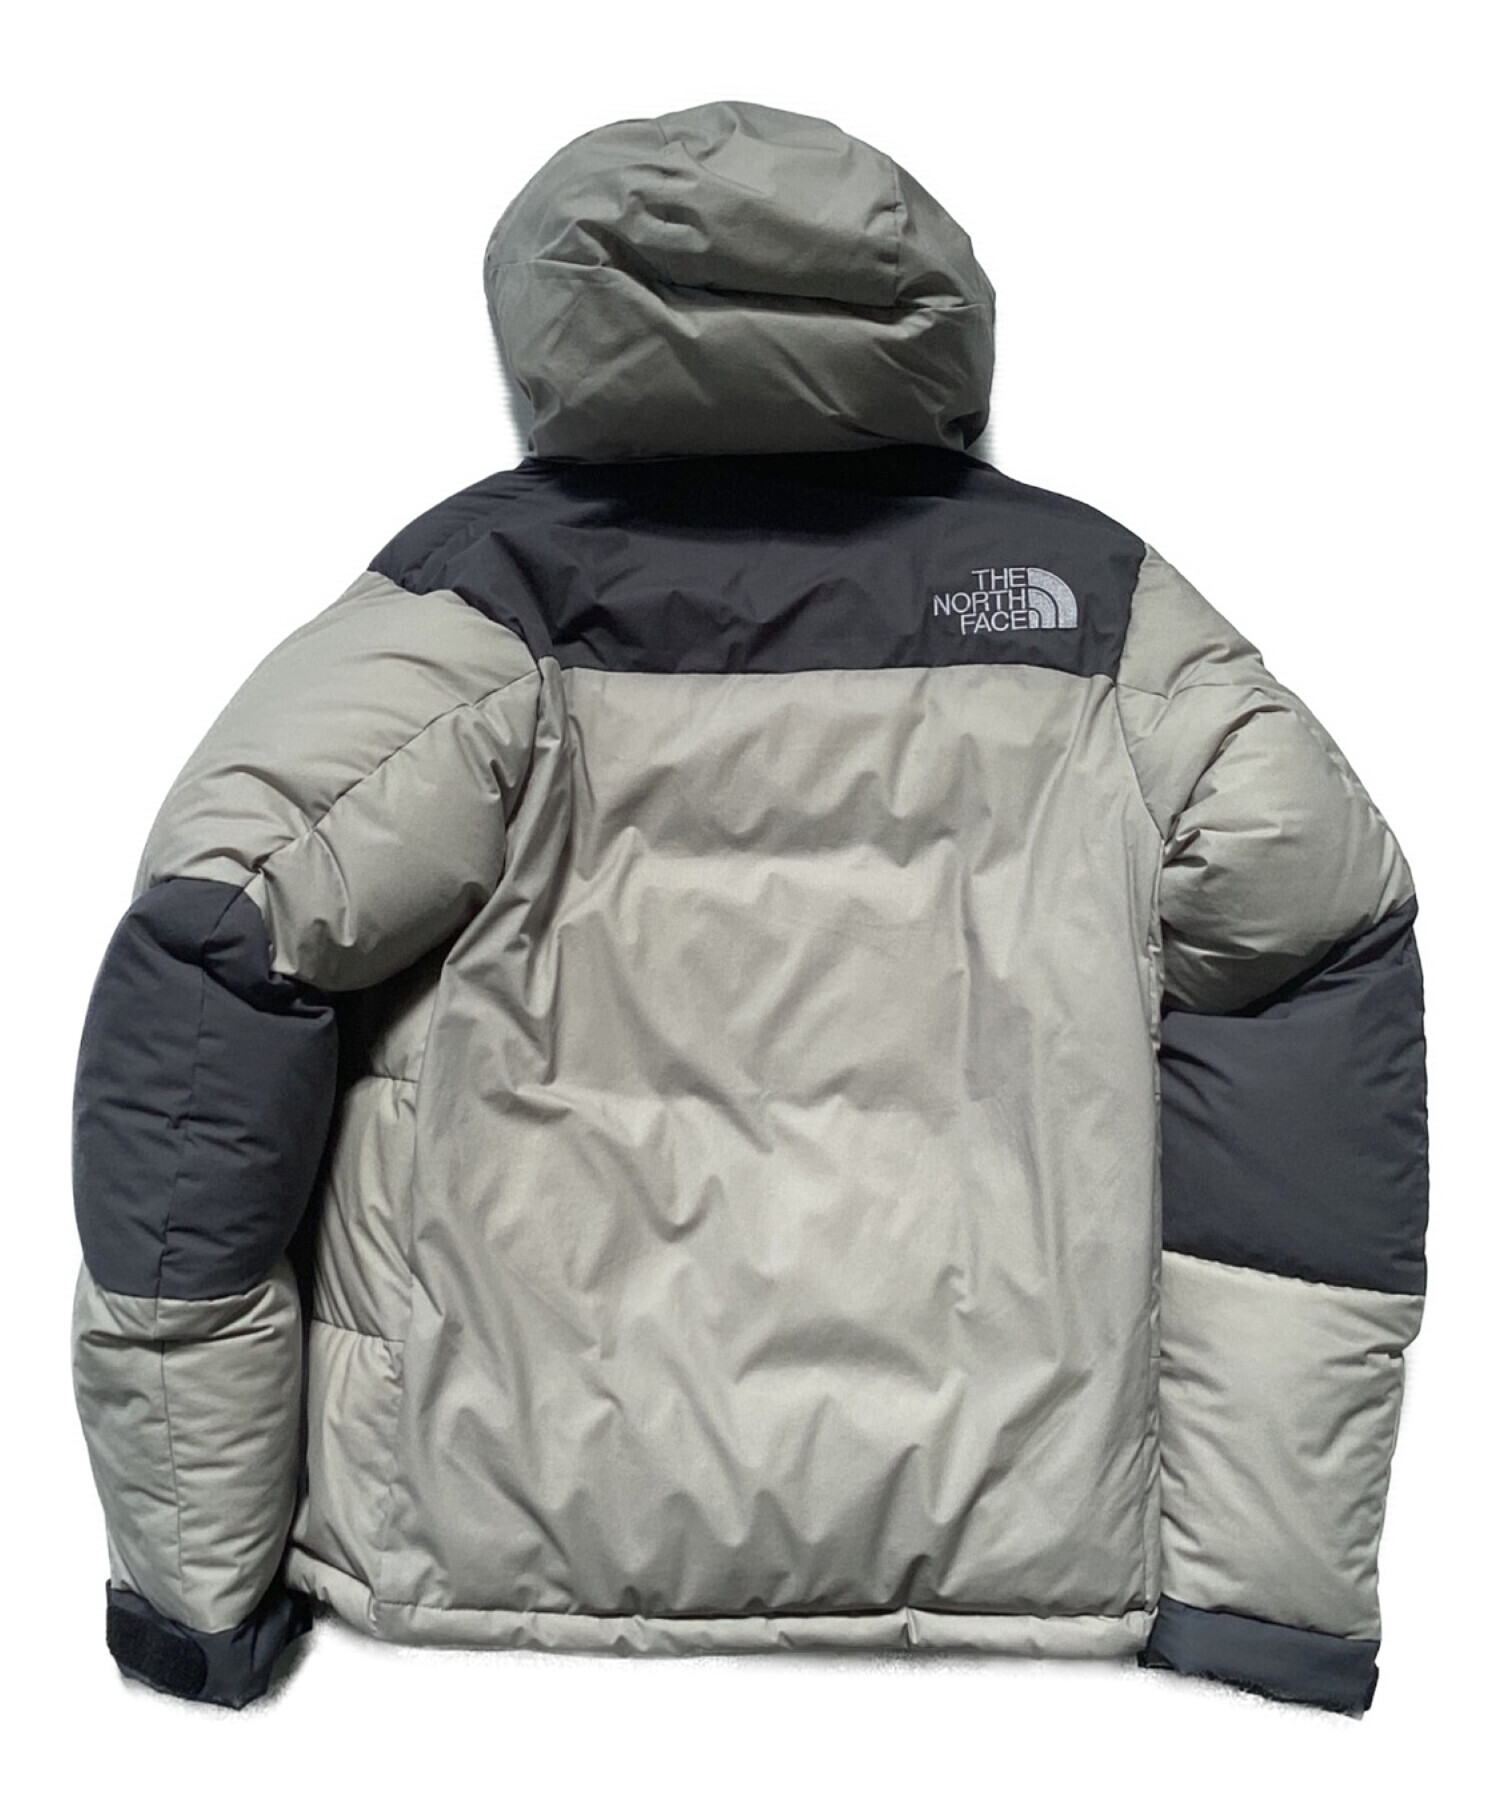 THE NORTH FACE バルトロライトジャケット　黒　M